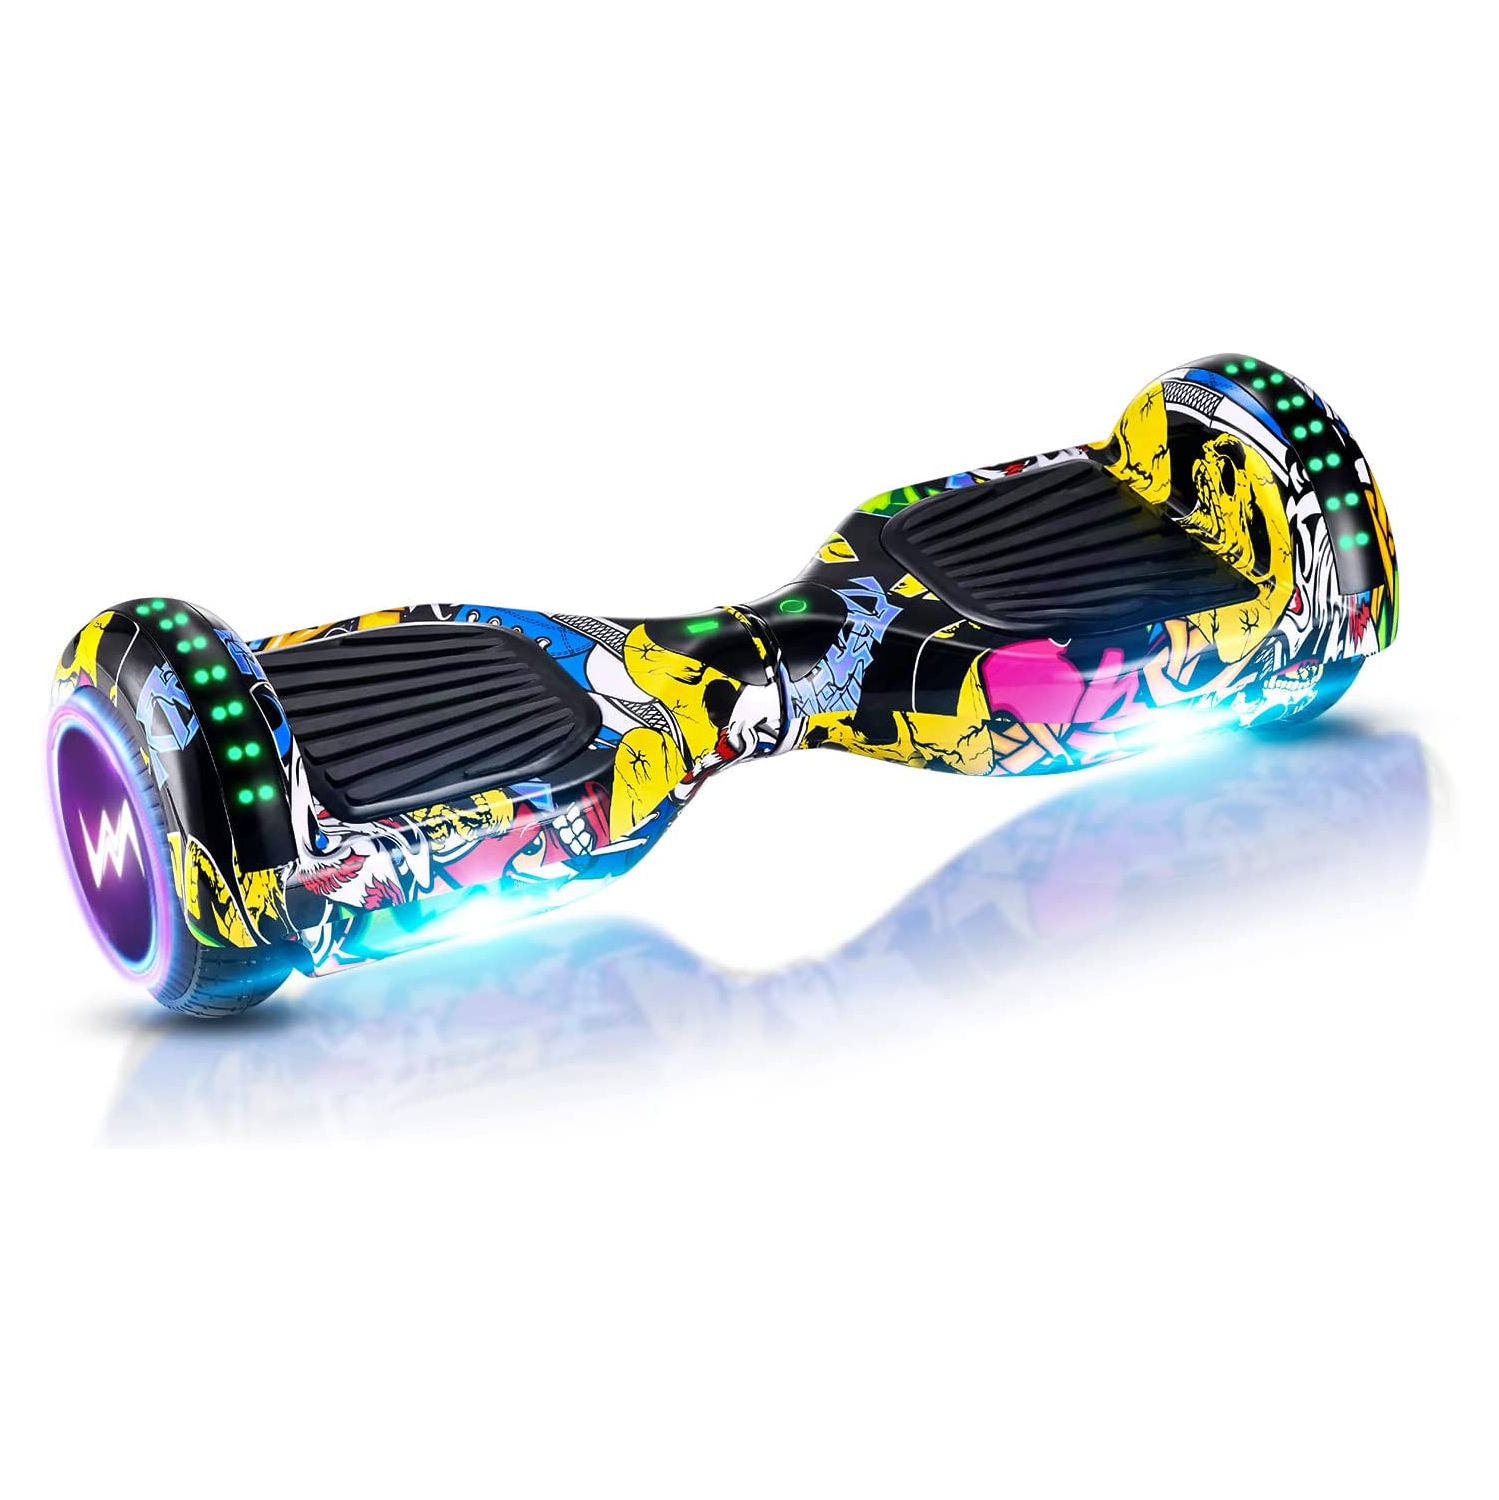 WEELMOTION HIPHOP Hoverboard with Music Speaker and LED Front Lights, Strap Lights, Shining Whees All Terrain 6.5" UL 2272 Certified Hoverboard with free hover board bag